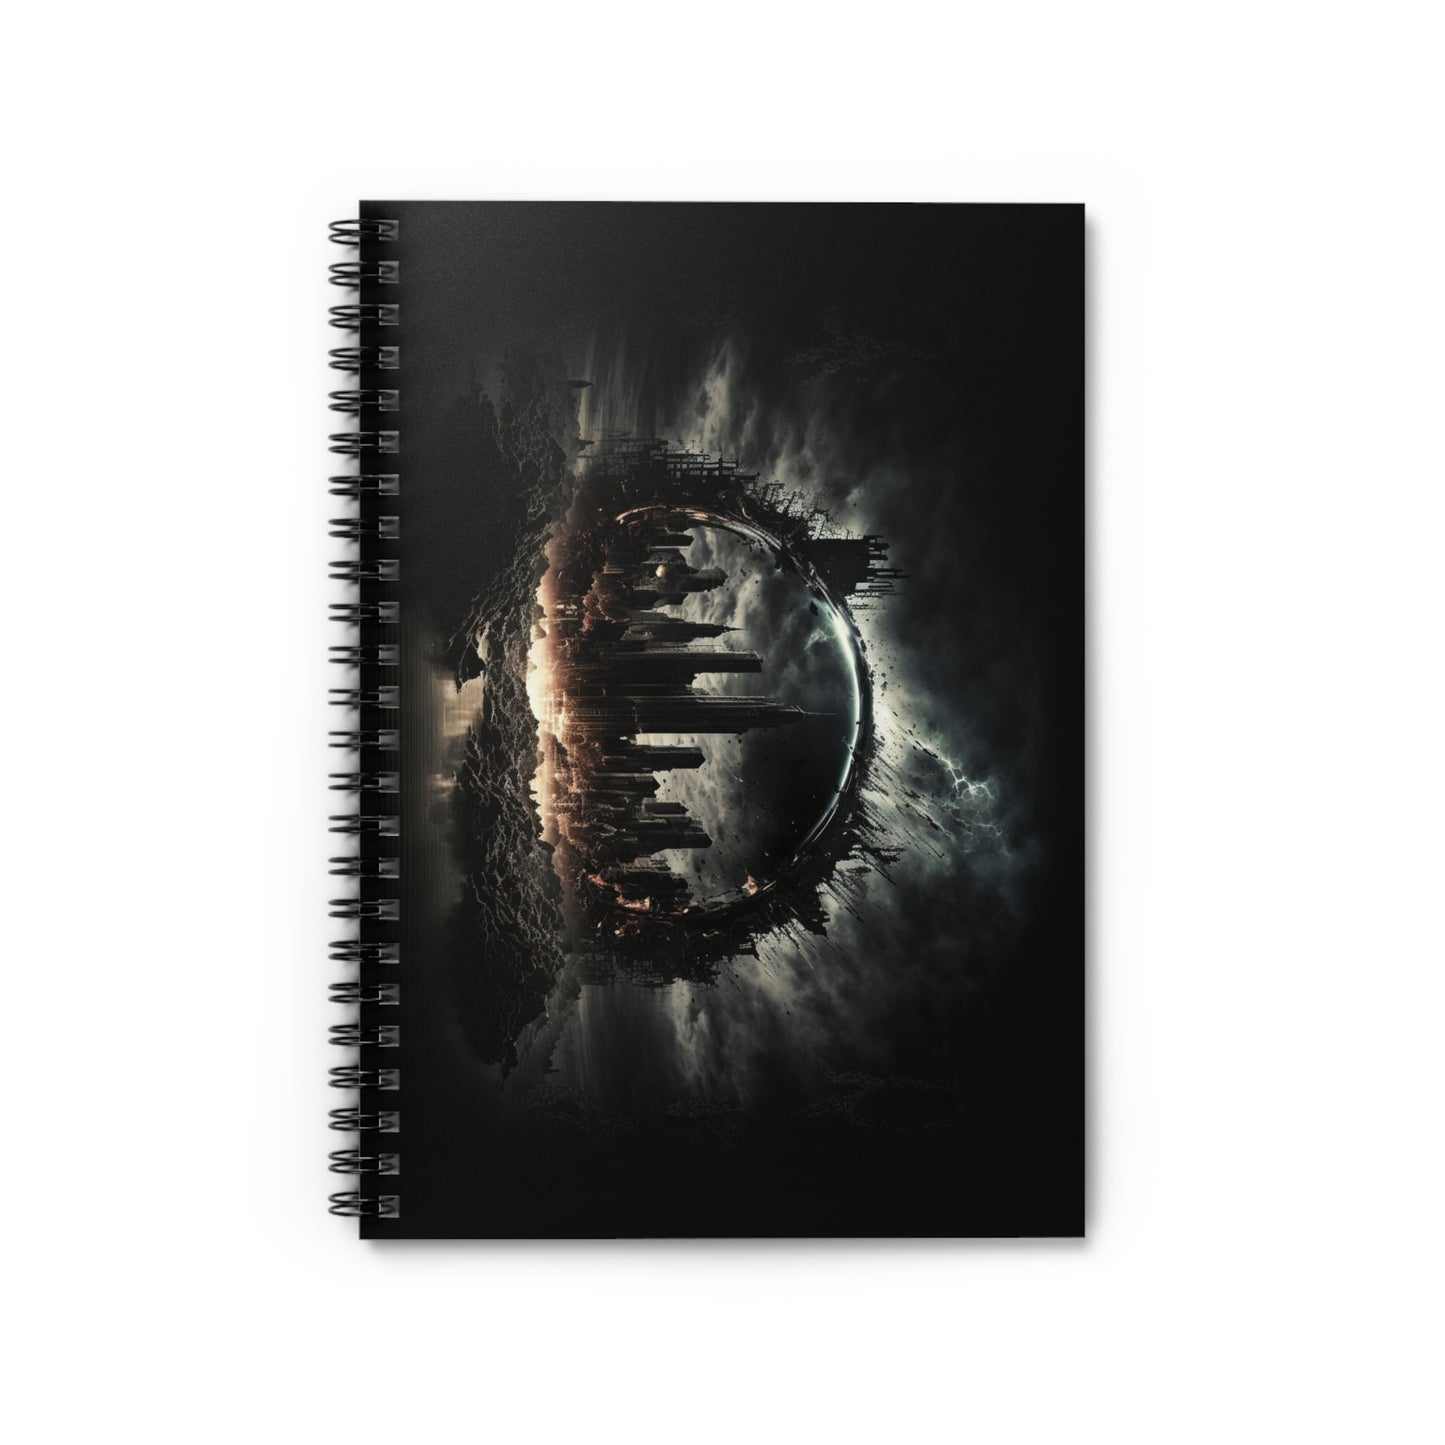 Metallic Hell Cityscape Spiral Notebook - Ruled Line